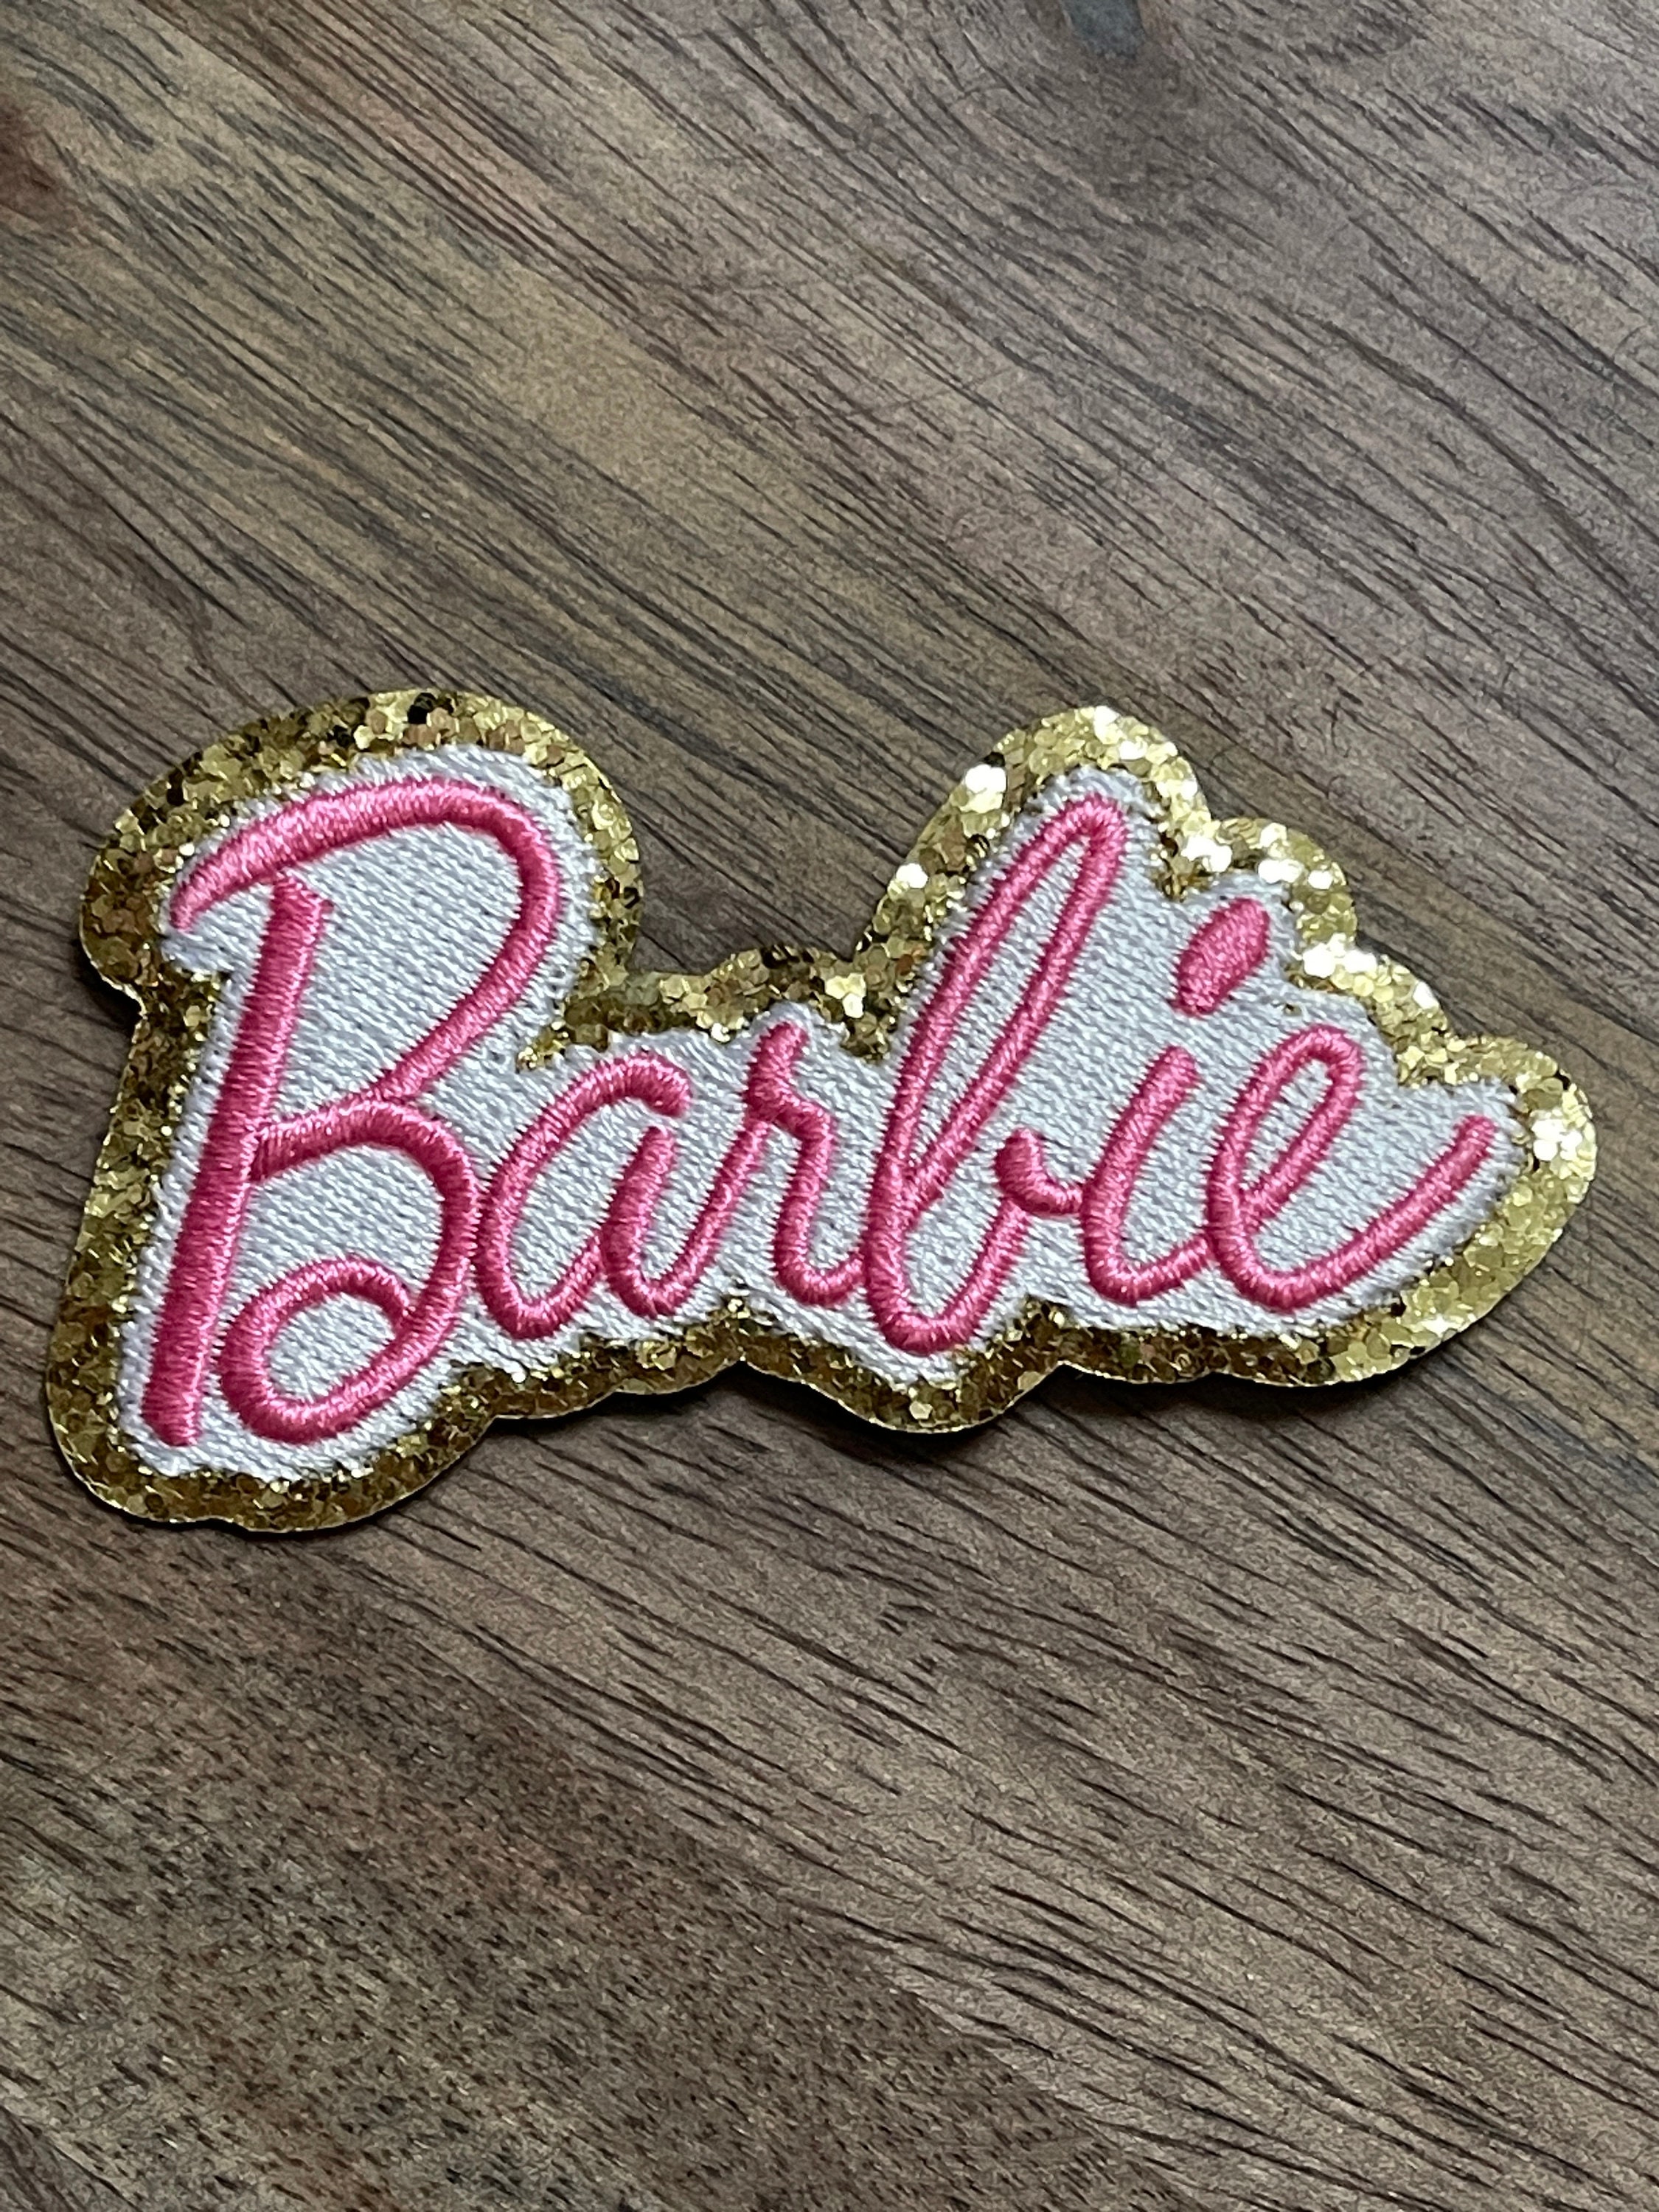 Pink Barbie Logo Iron On patch Sew On transfer logo Badge - Brand New